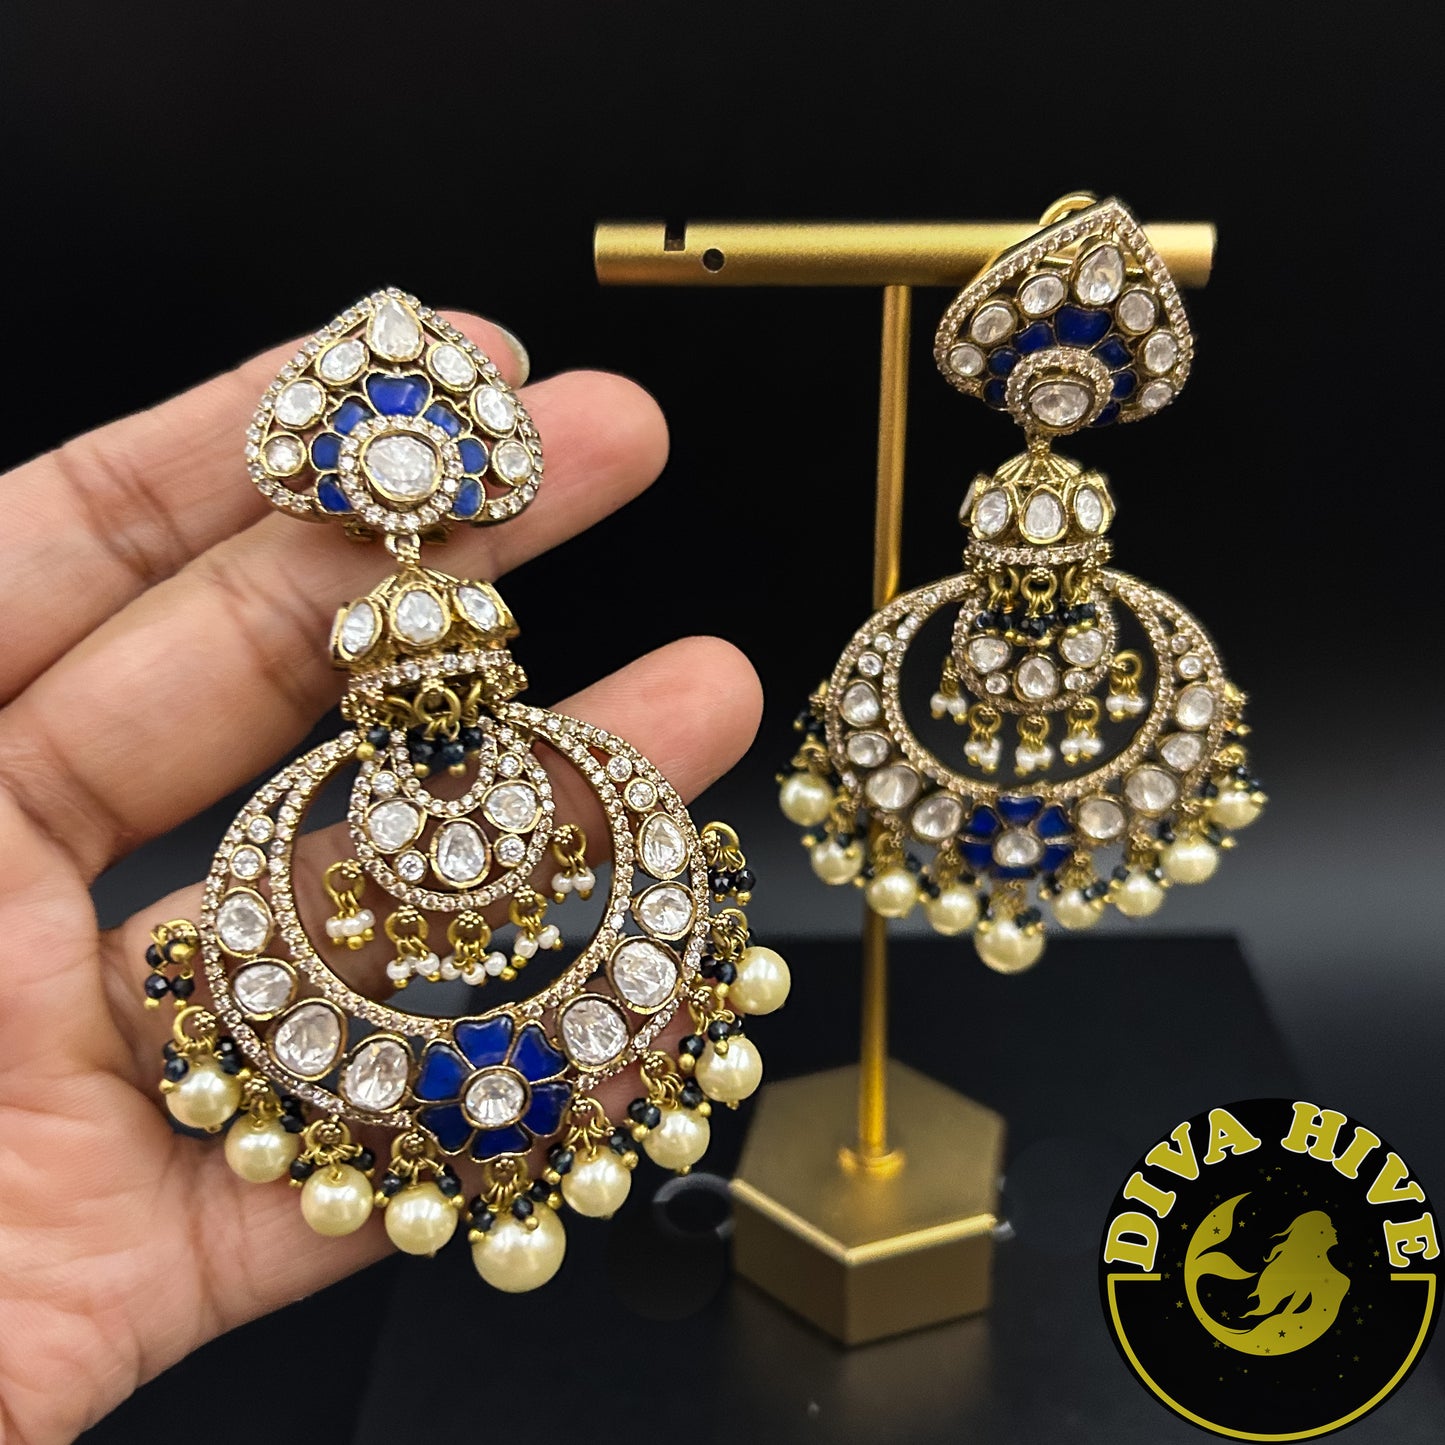 Aarzoo Statement Earring - Earring -Diva Exclusive, Earring, featured, moissanite - Divahive